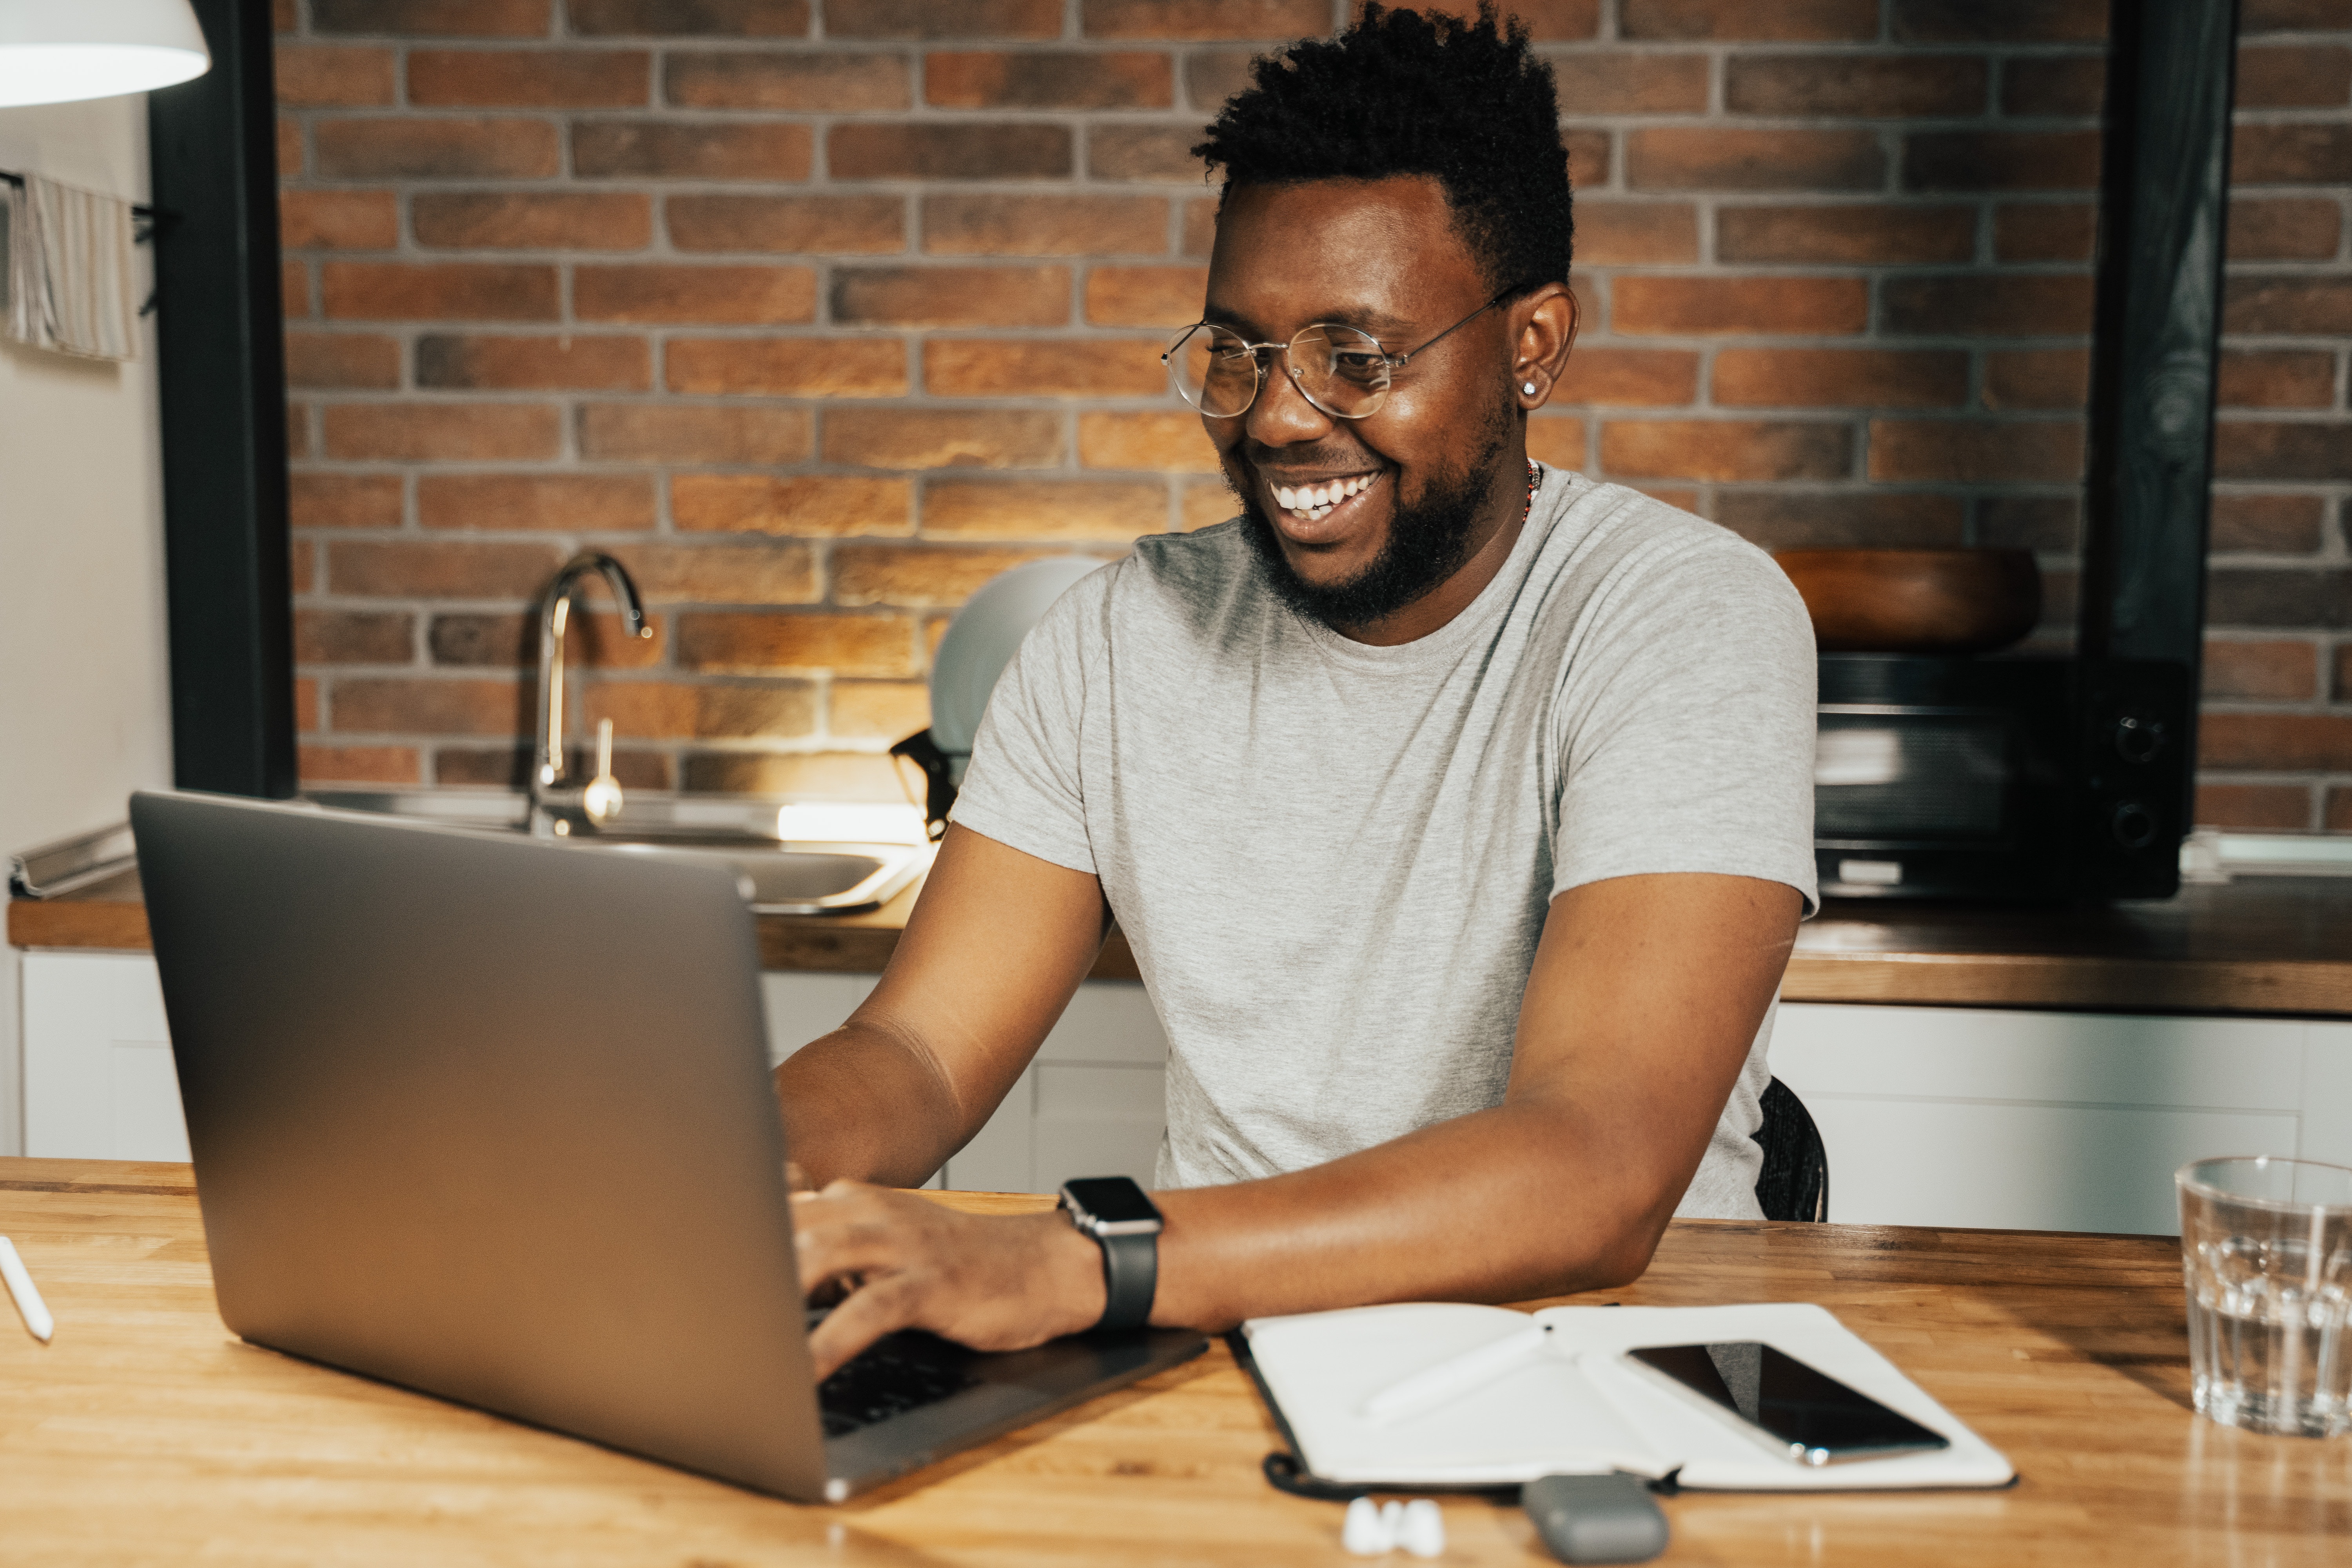 An attractive black man wearing glasses smilies while on his laptop on his kitchen counter.